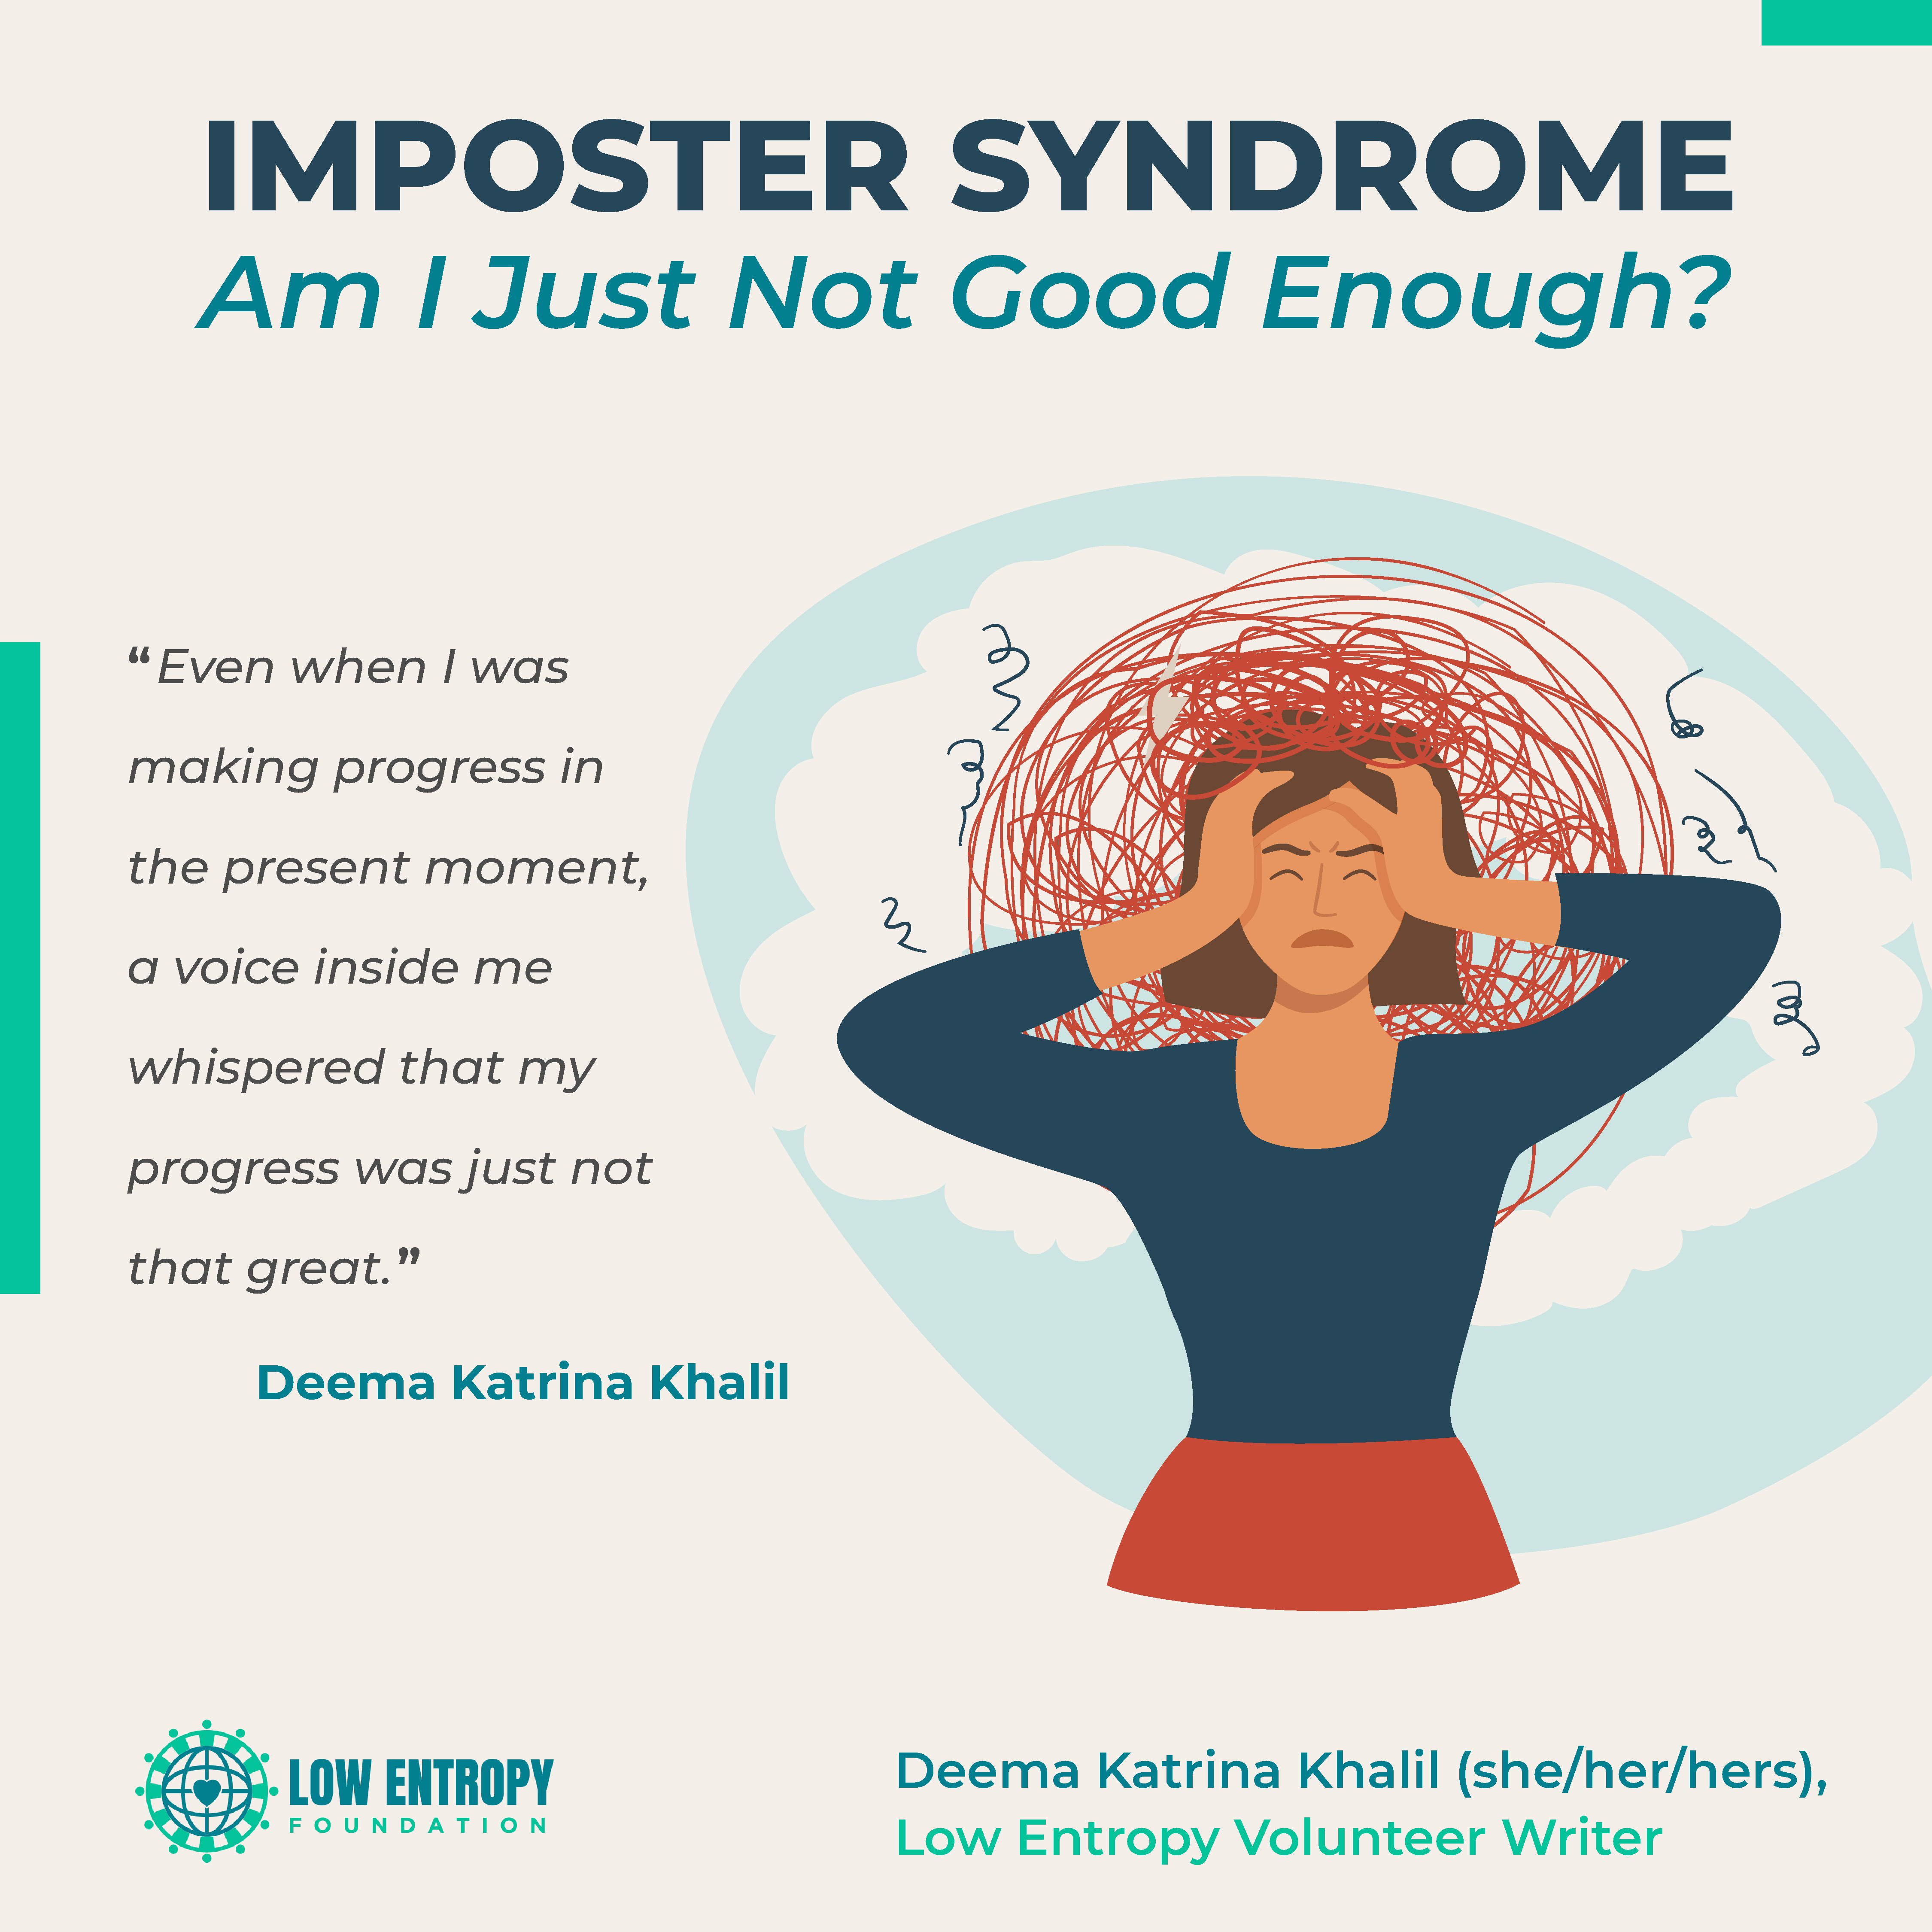 Imposter Syndrome – Am I Just Not Good Enough?